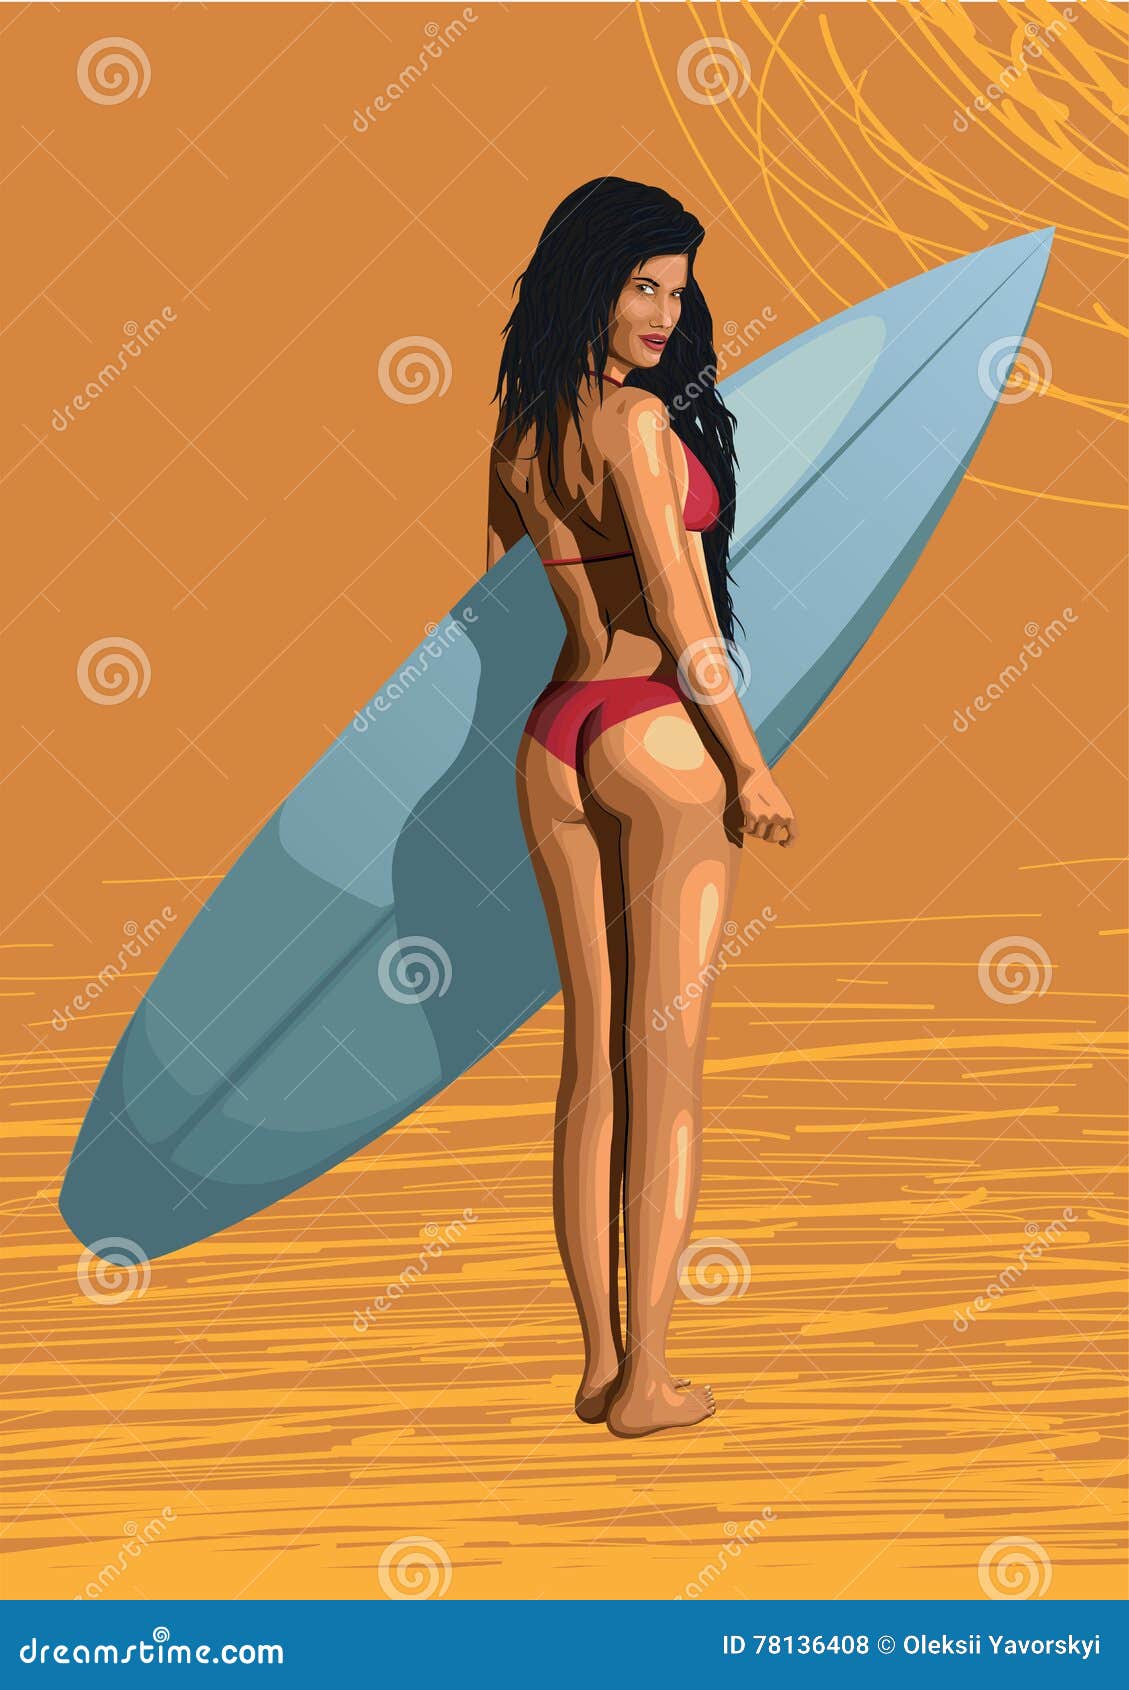 beautiful girl hot woman surfer, surfing, with surfboard, s